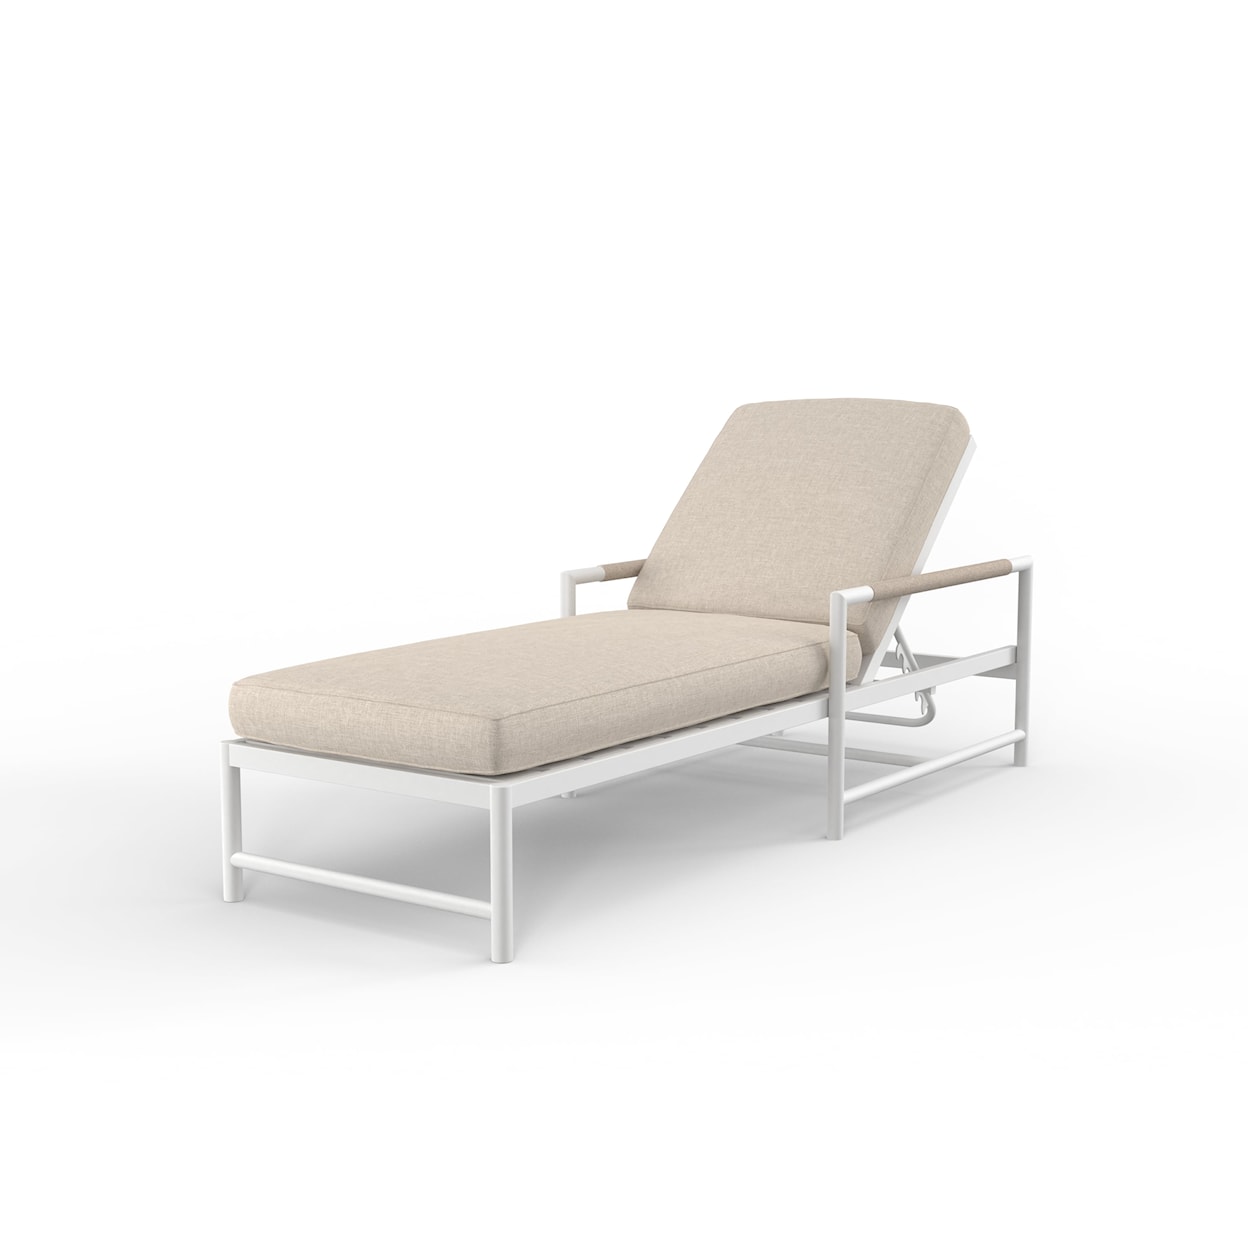 Sunset West Sabbia Outdoor Chaise